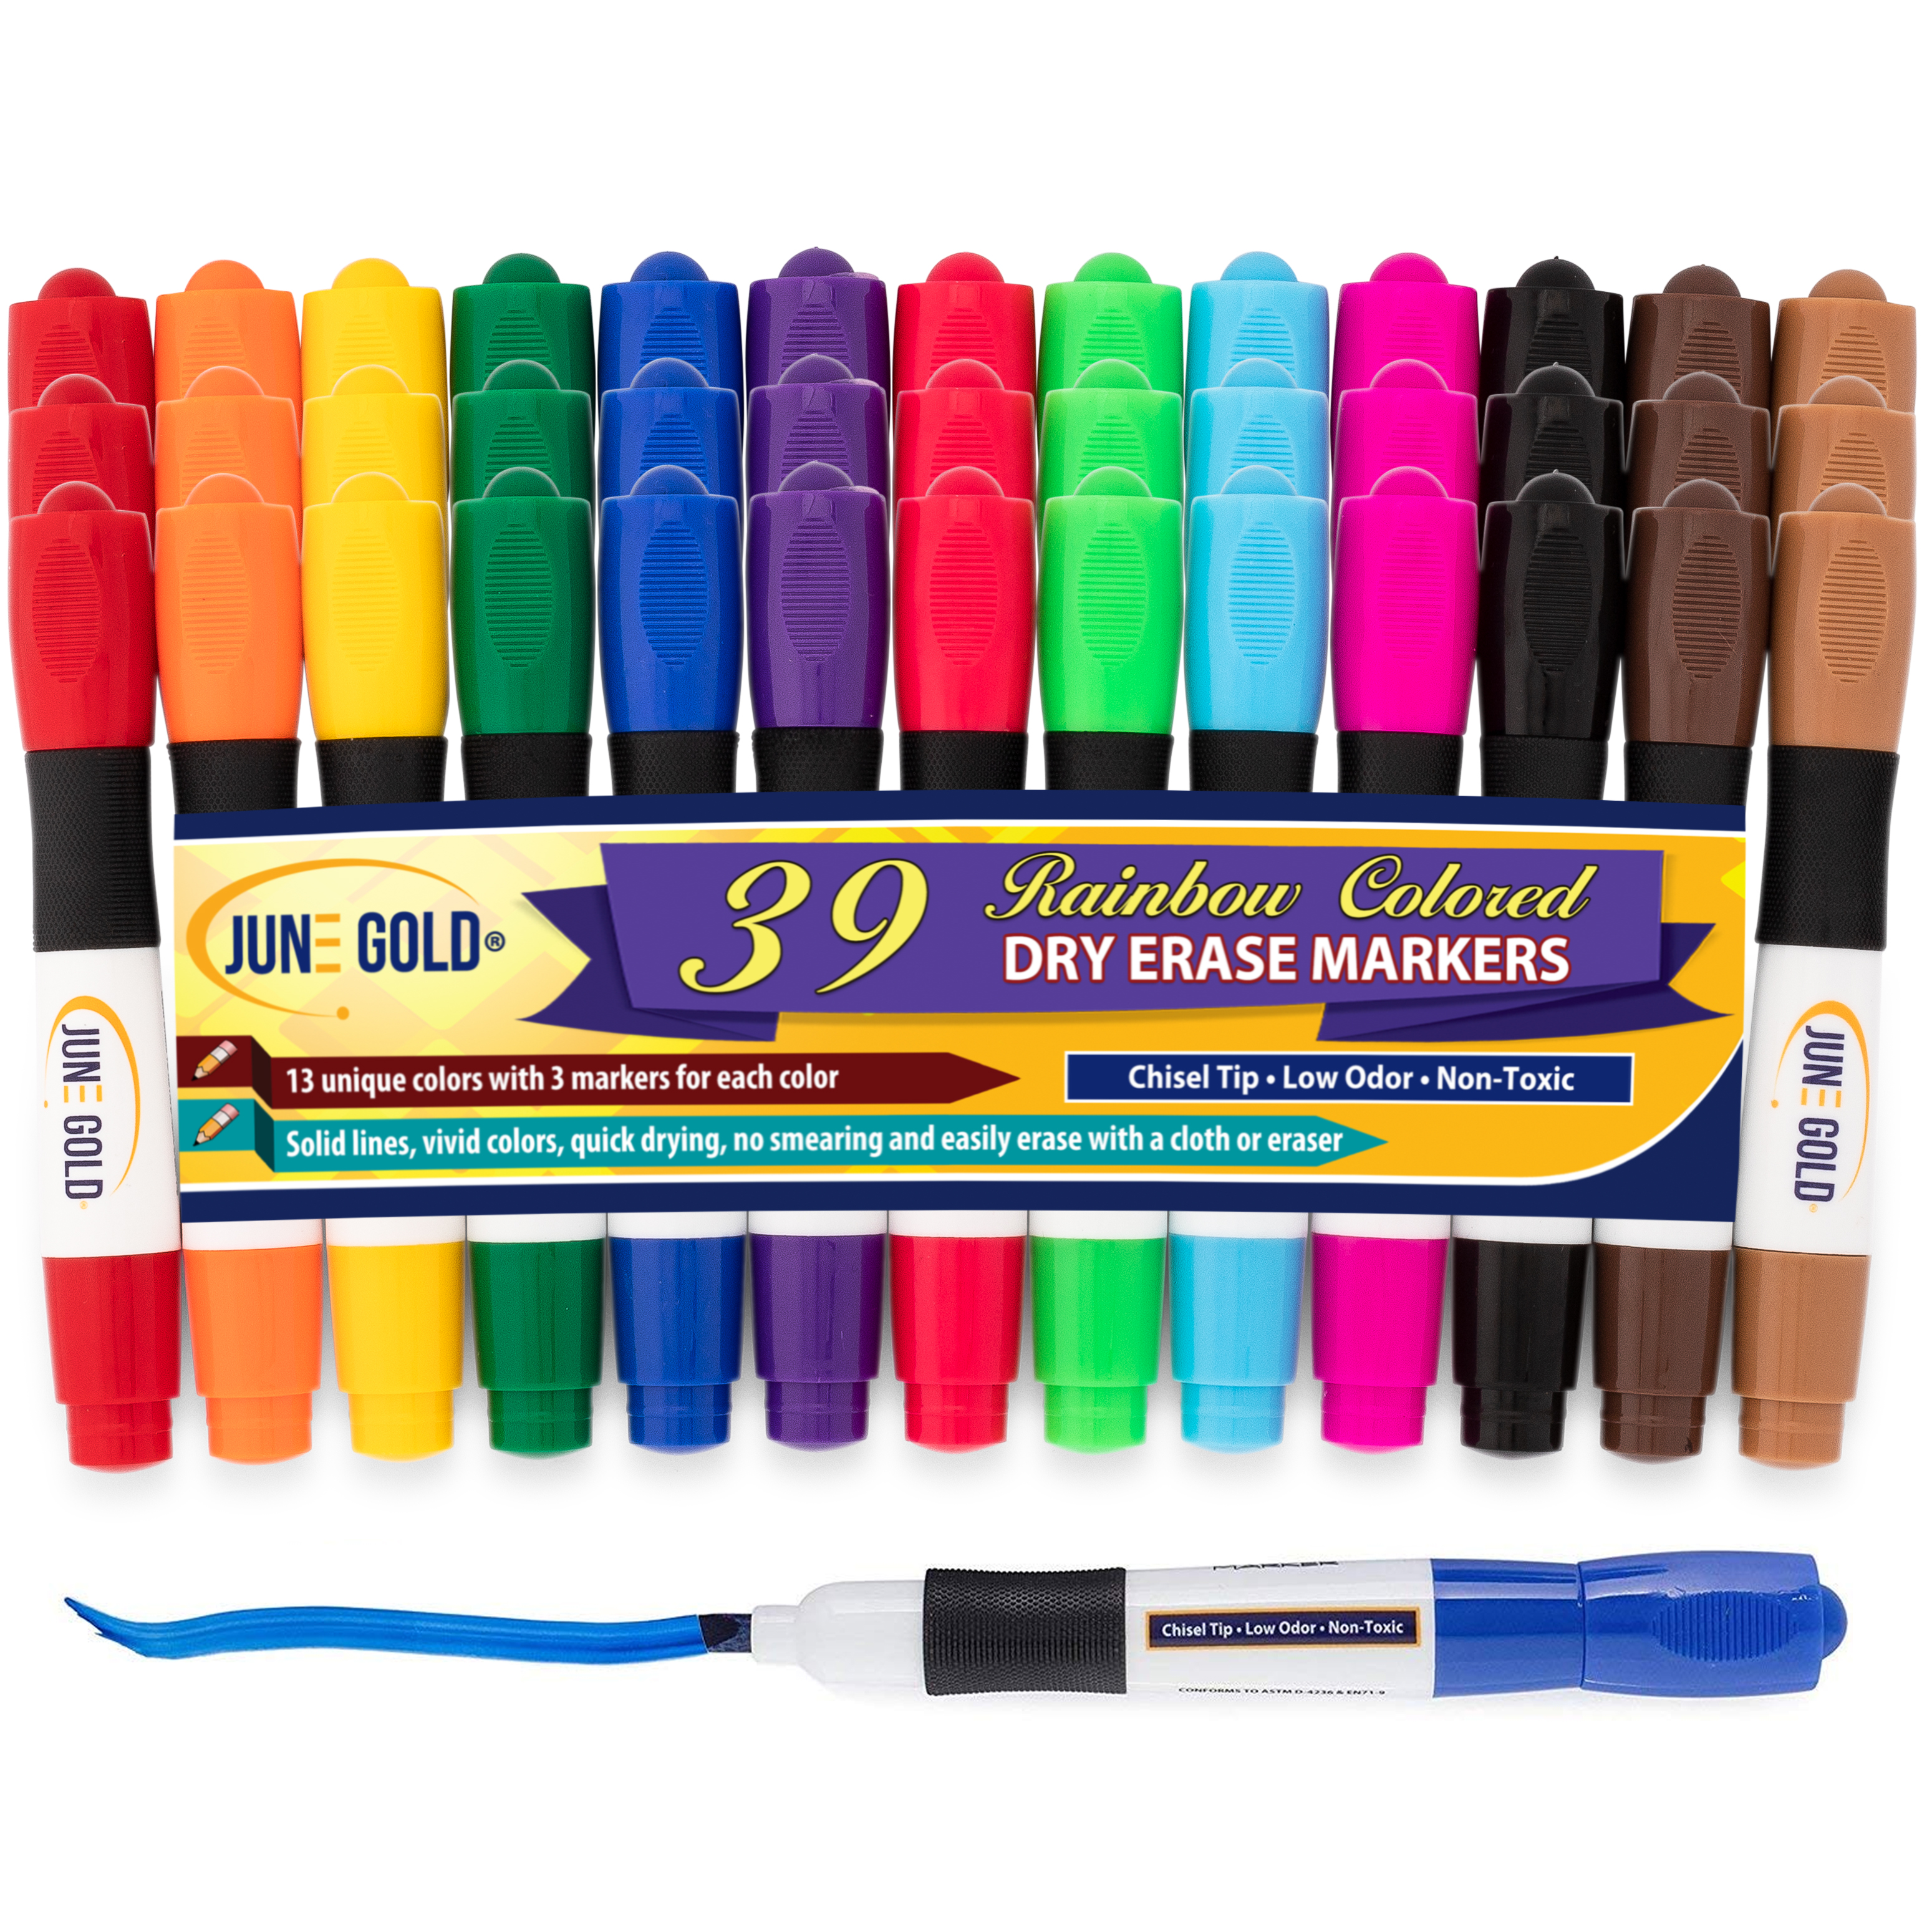 Double Ended Bullet Tip Dry Erase Markers, 6 Piece Set, Mardel